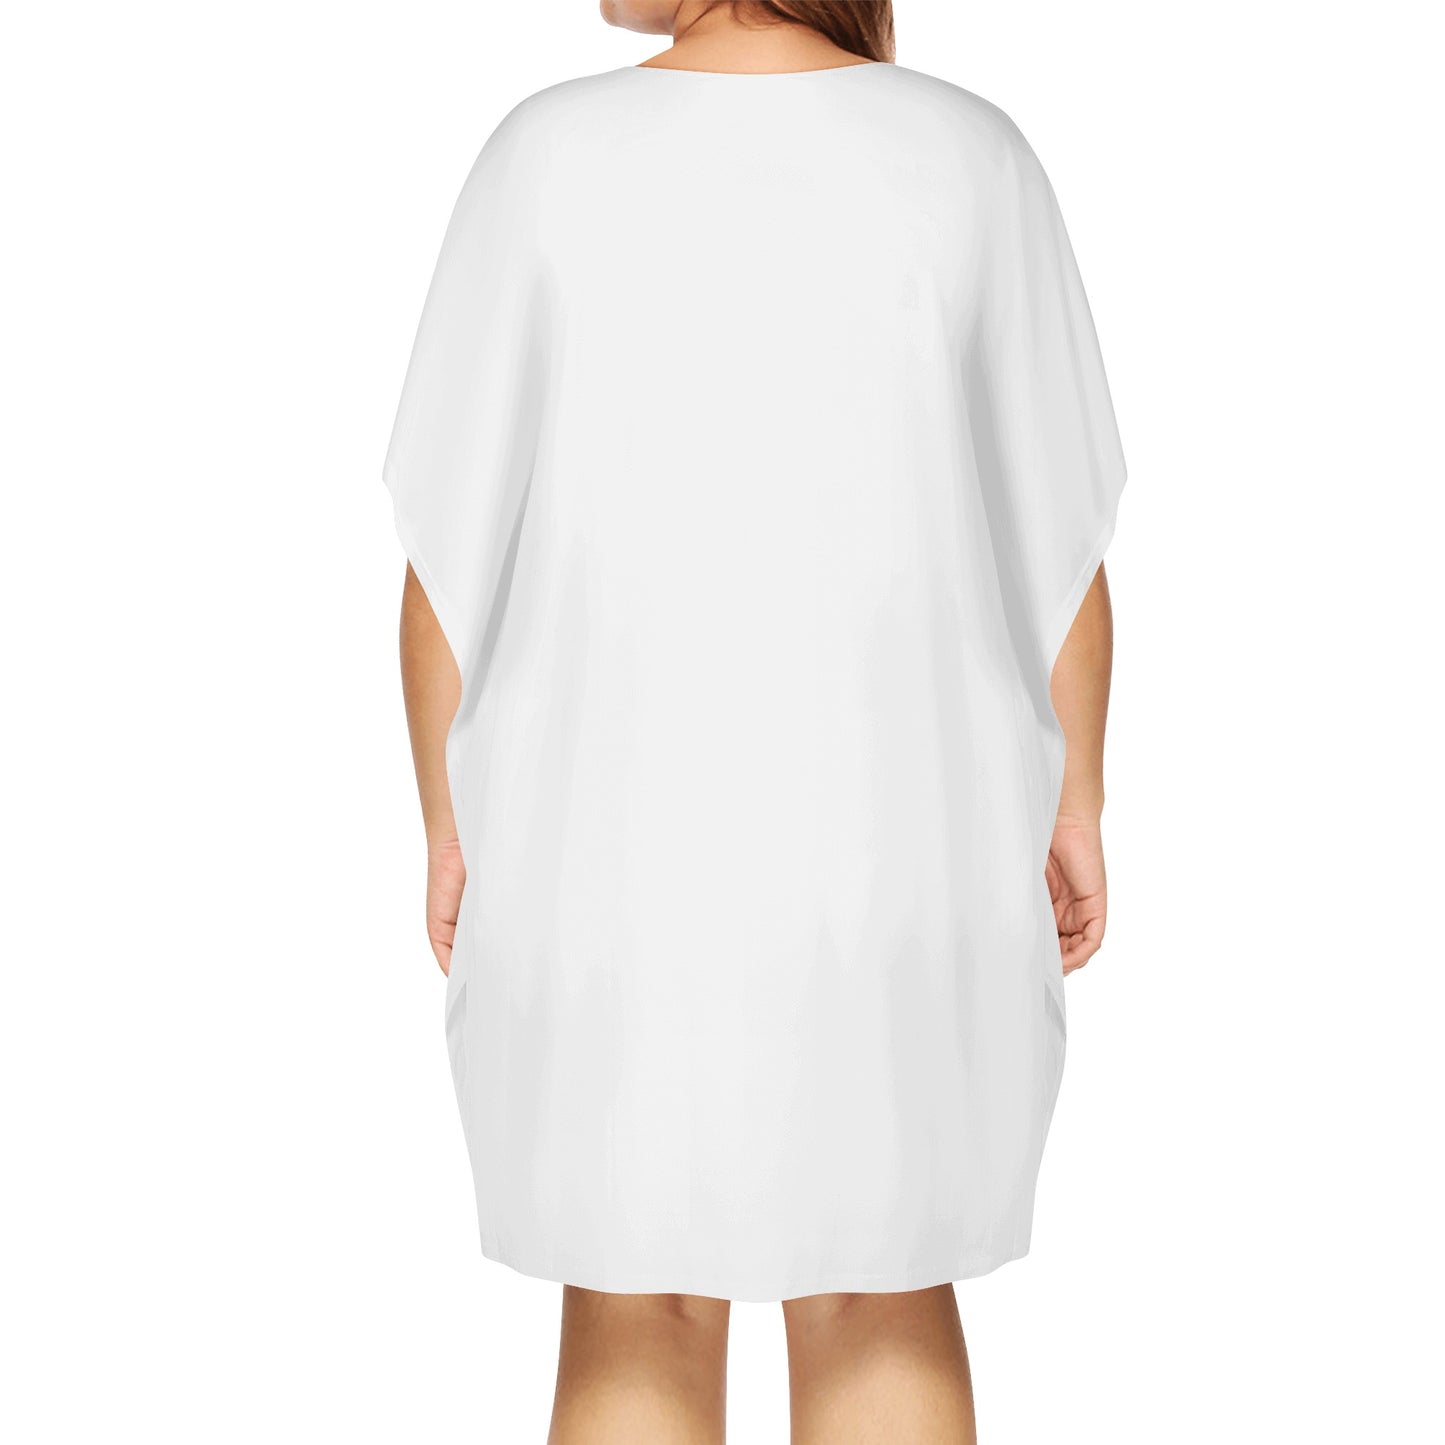 Be Who You BeeWomen's Daily Plus Size Loose Dress